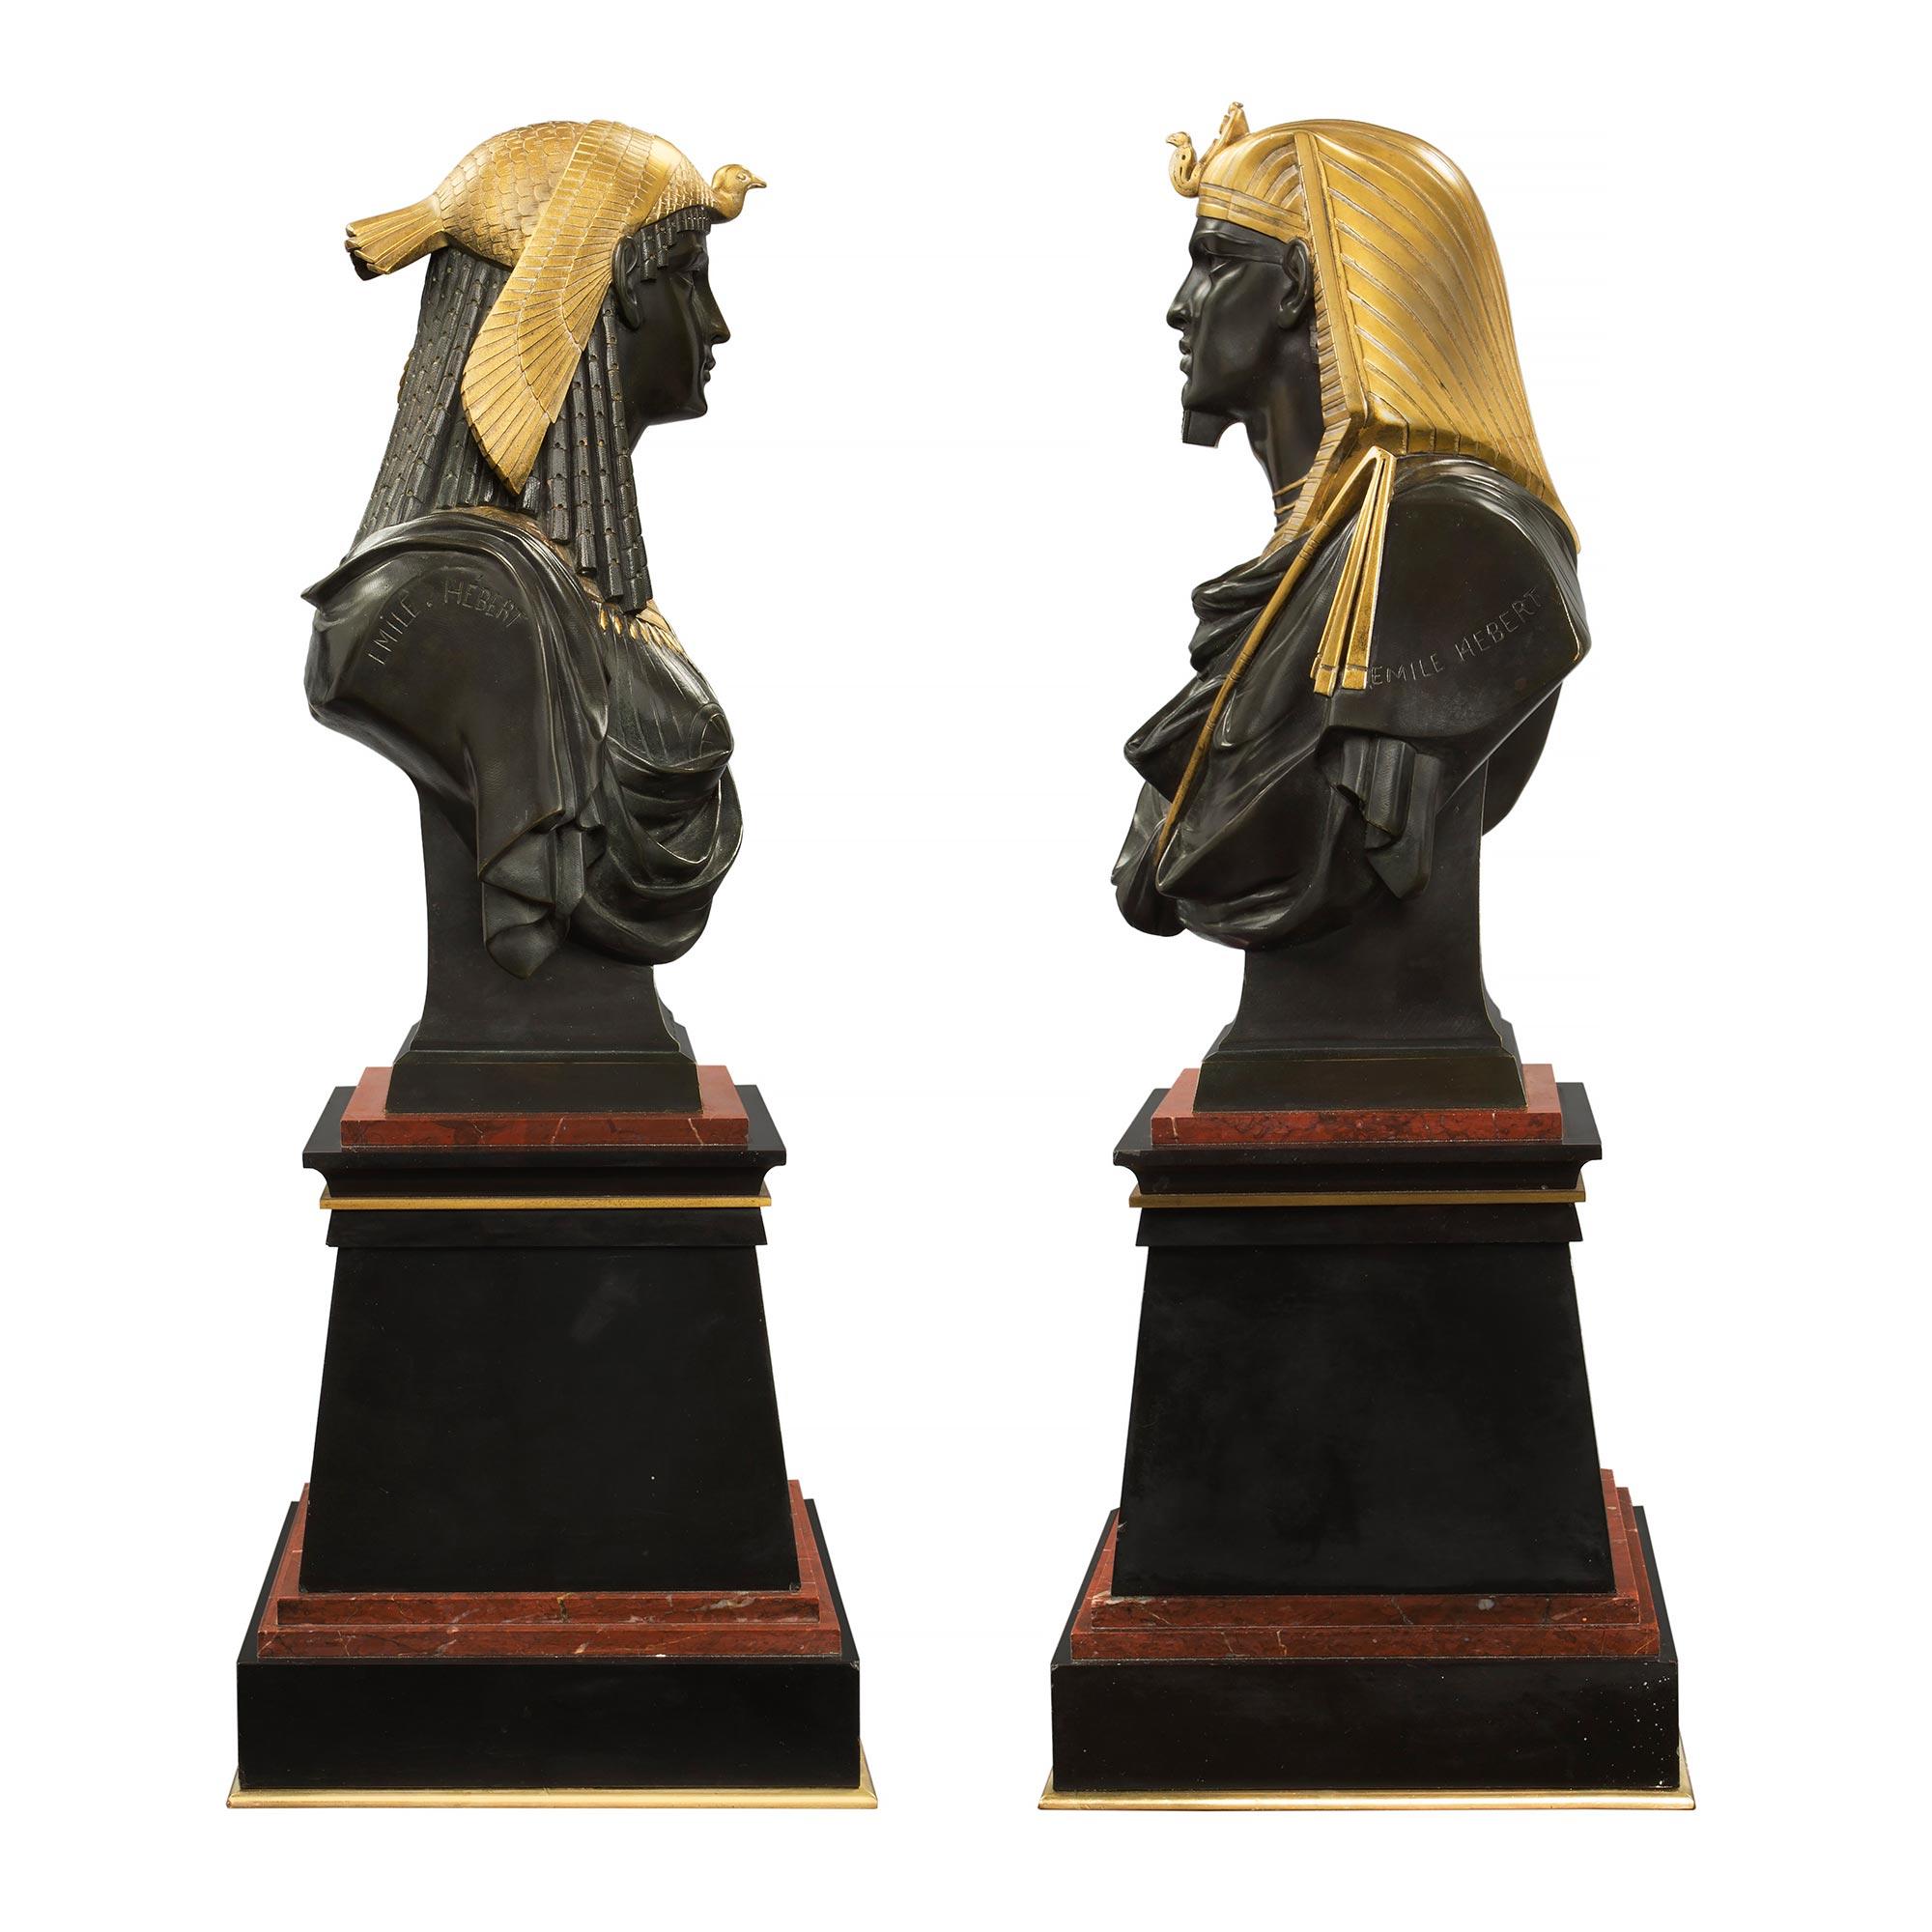 A very handsome pair of French 19th century Egyptian Revival st. busts of Ramses the II and his wife Isis, signed by Pierre-Eugène-Émile Hébert. Each is raised on a black Belgian marble base with ormolu trim and etched eagle design on the front,